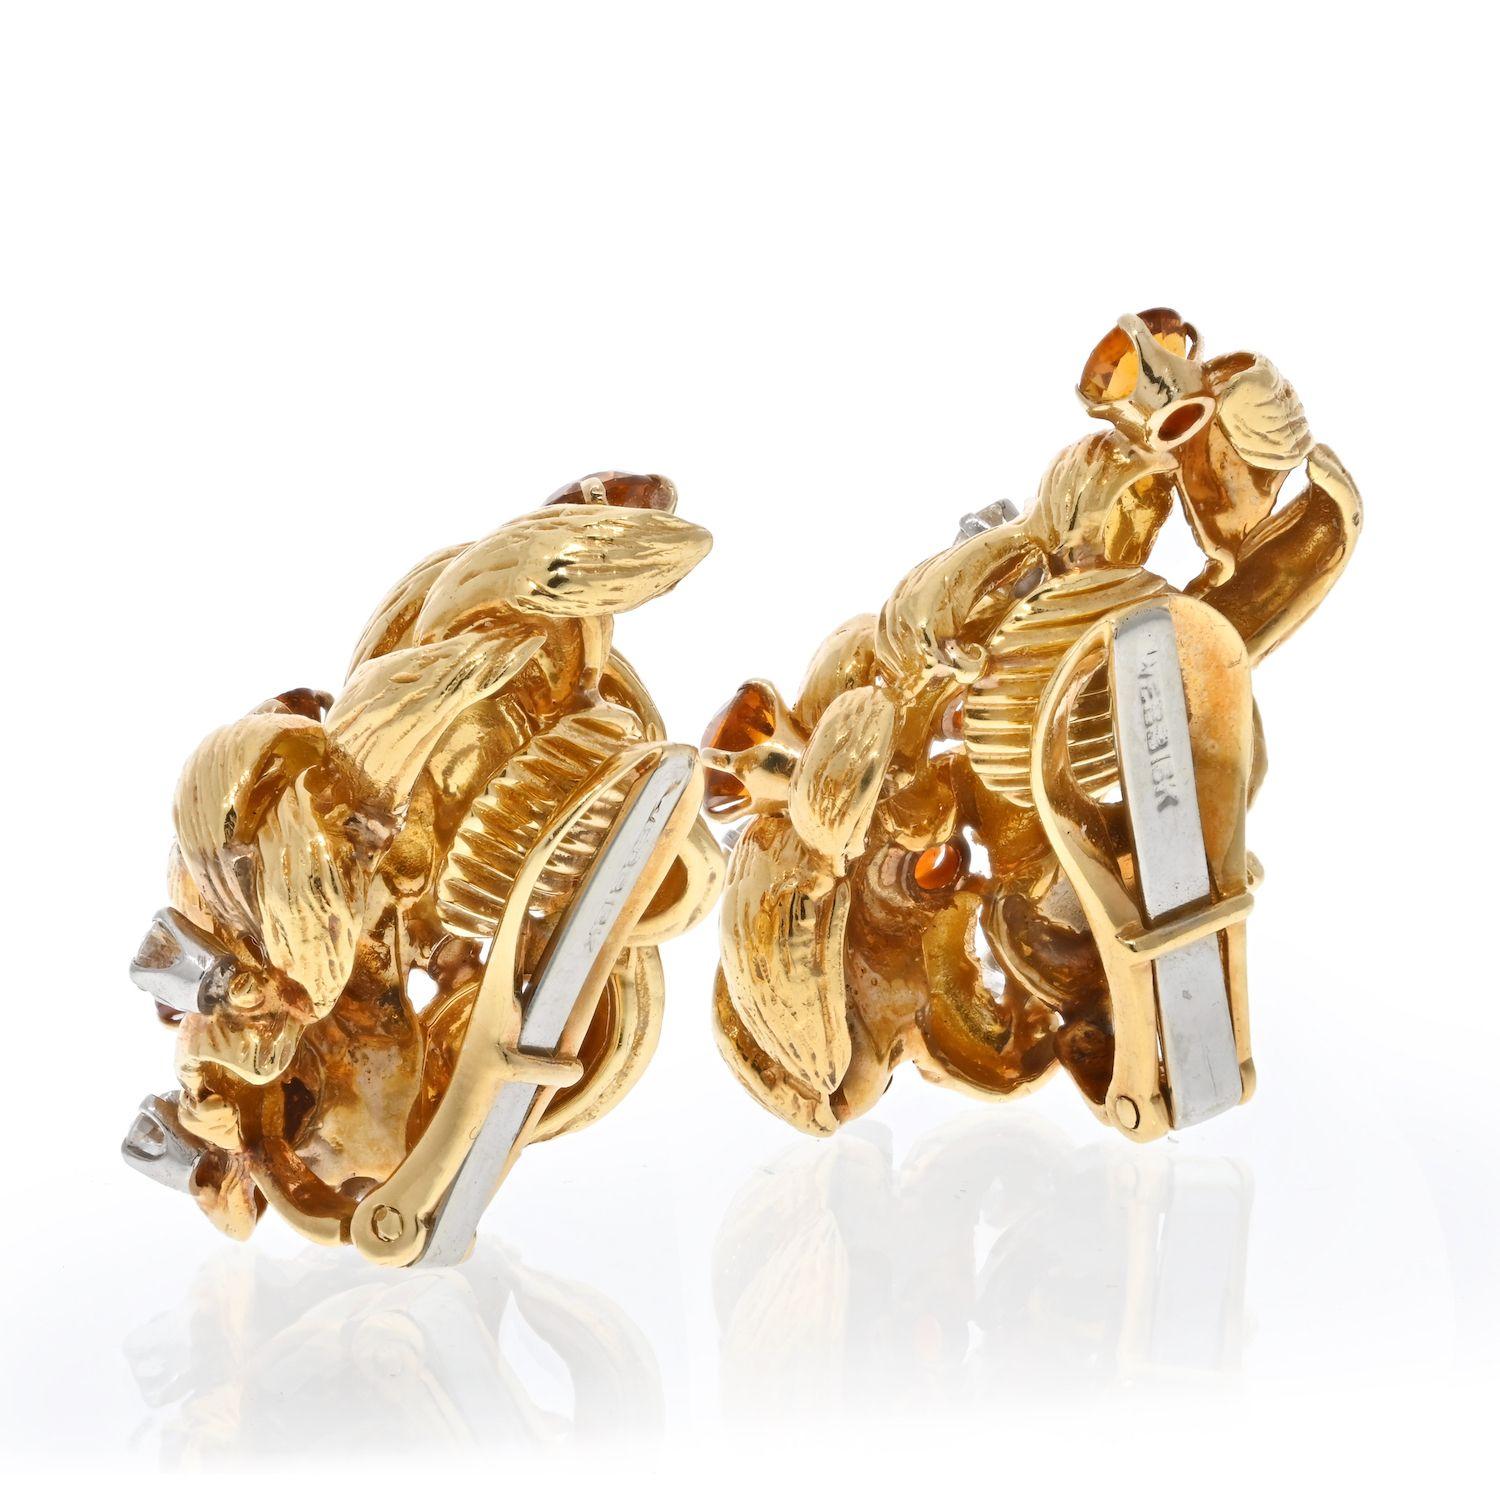 Lovely estate earrings by David Webb with diamonds and citrines come to us from the older collections. Signature finish over the gold. Diamonds and citrines are in great condition. The earrings are just under 1 inch long. 
Clip on closure. 